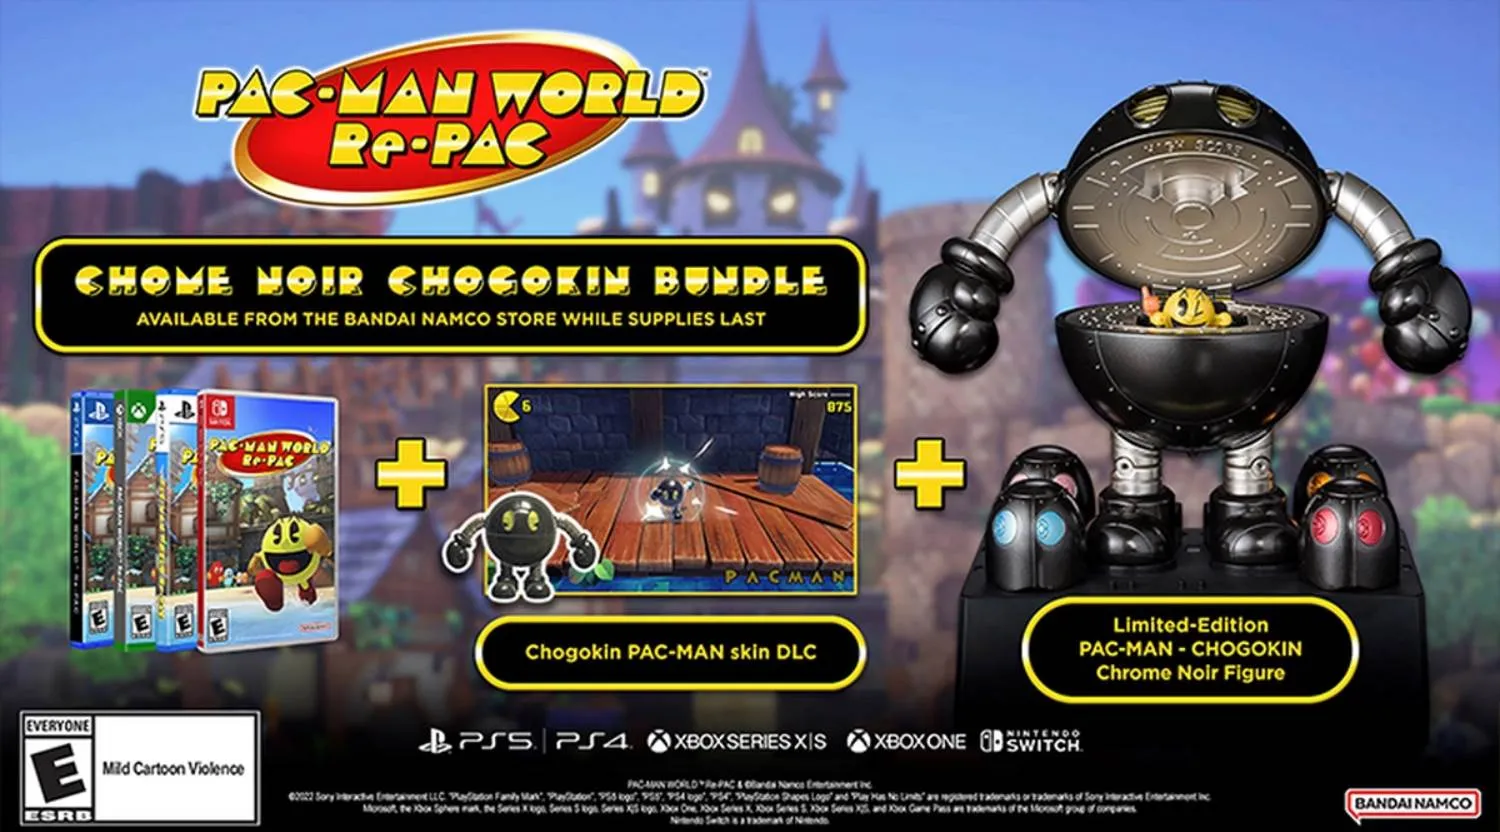 When is the Release Date of Pac-Man World: Re-Pac?